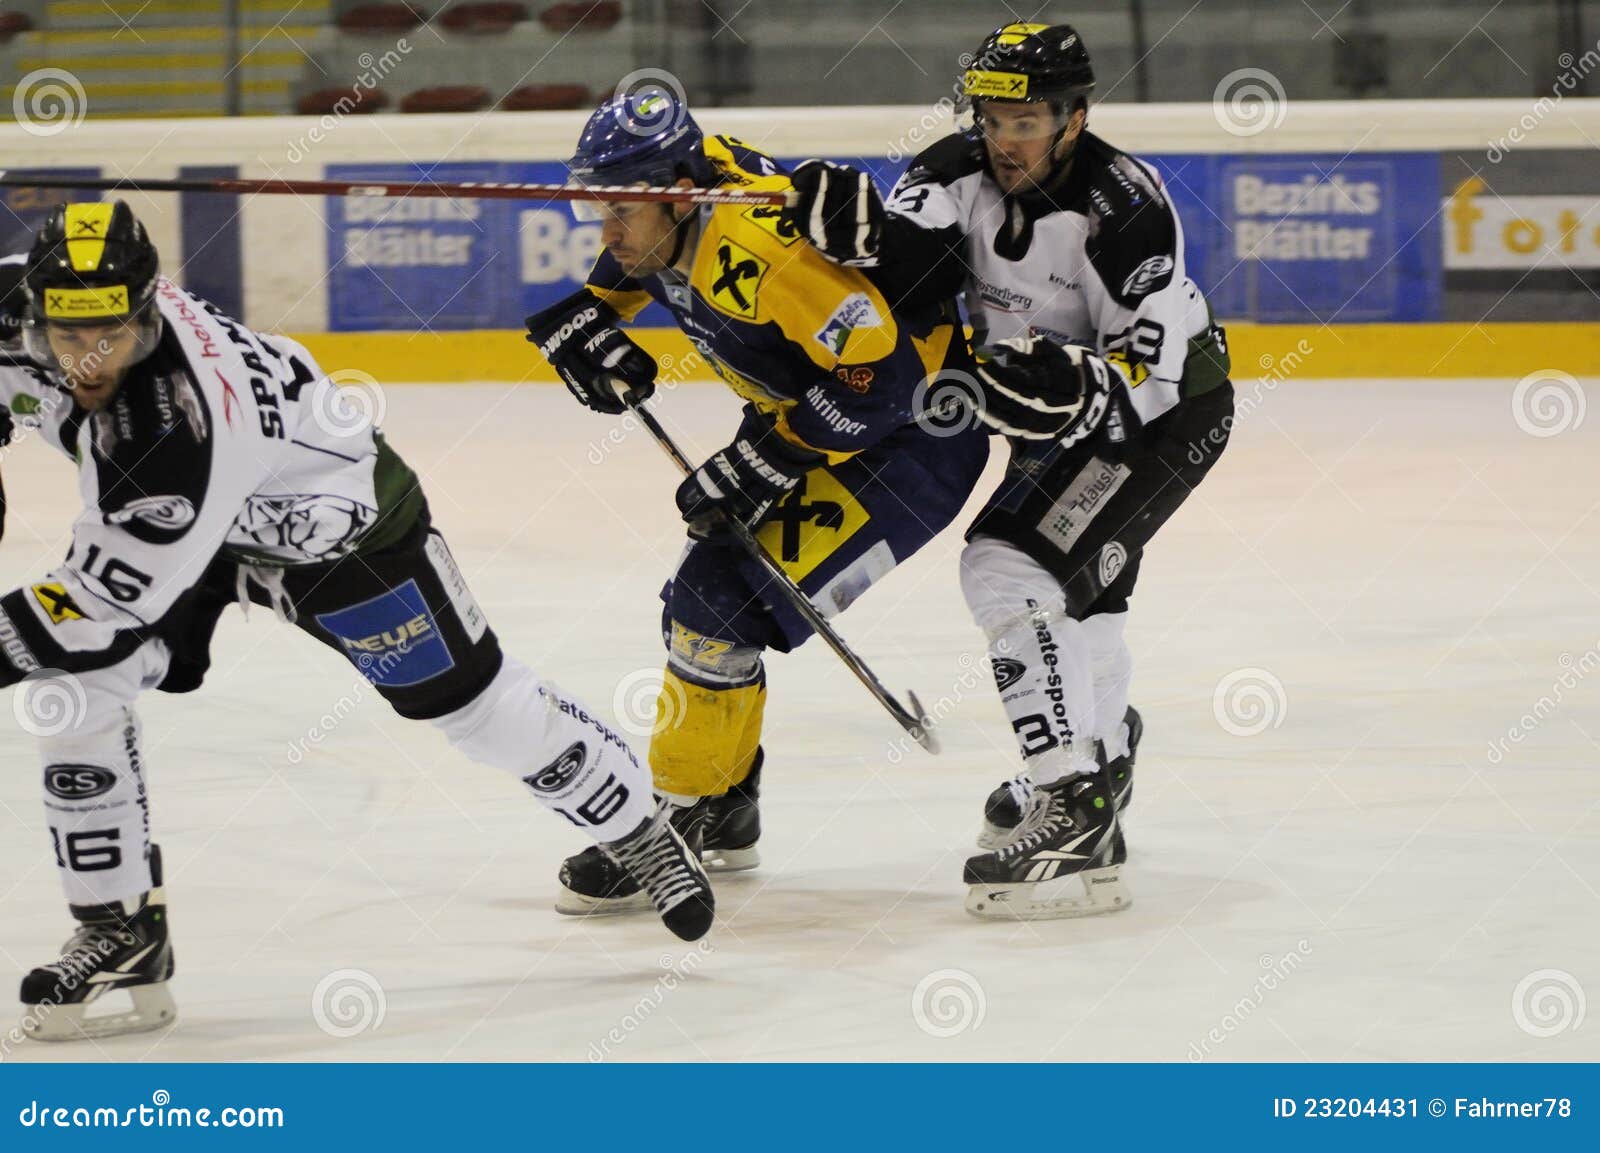  - hockey-game-action-23204431